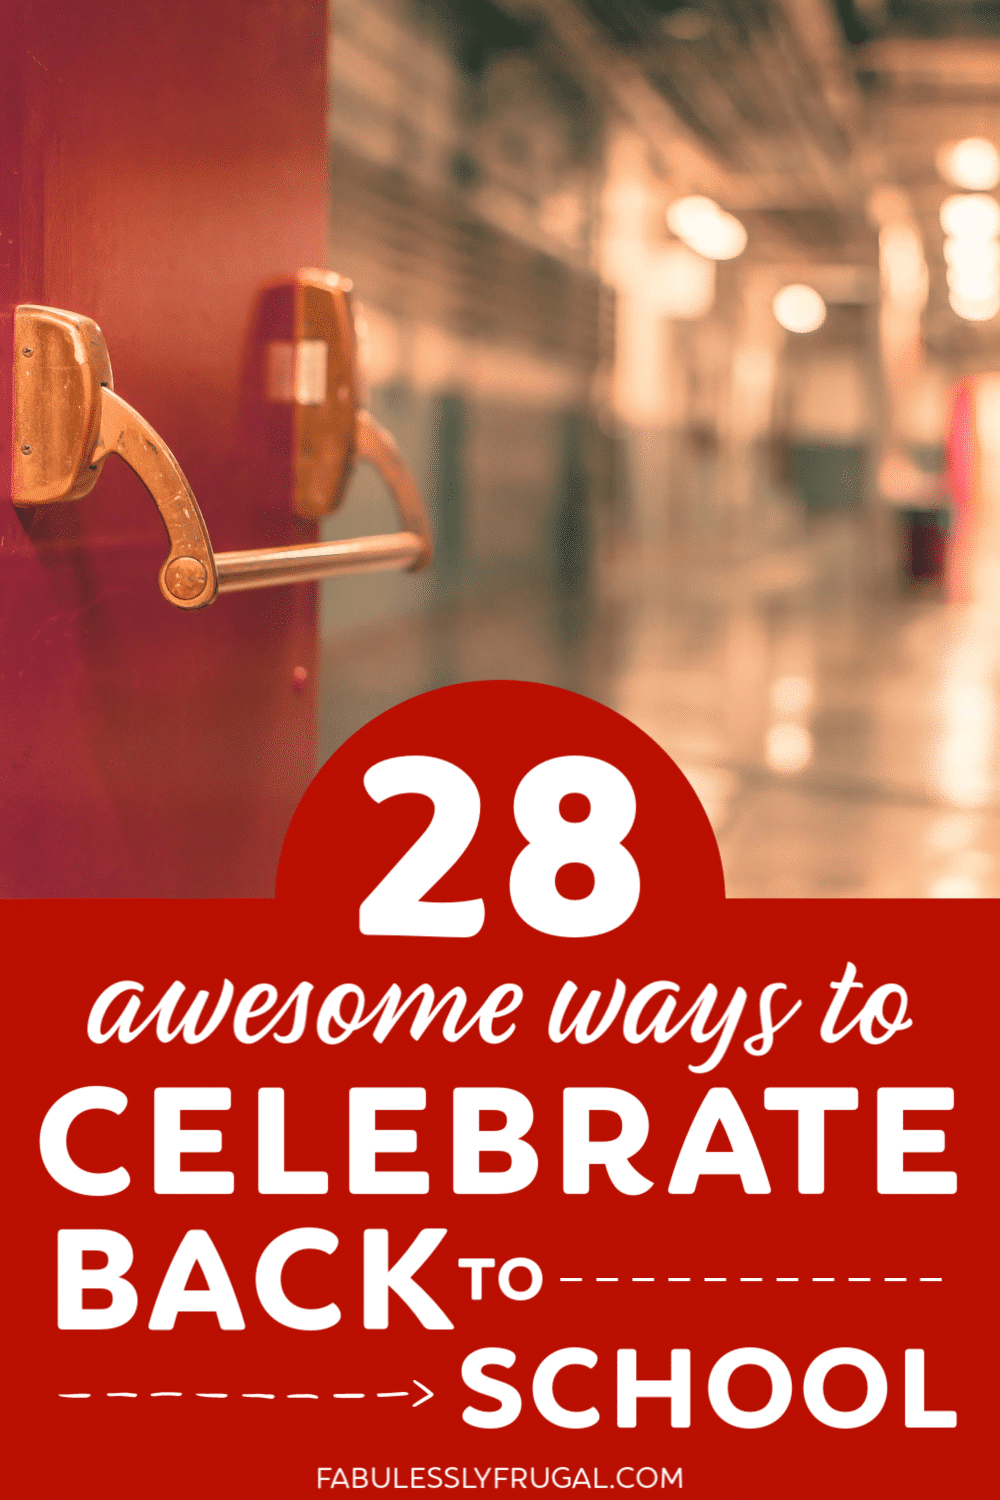 Awesome ways to celebrate back to school